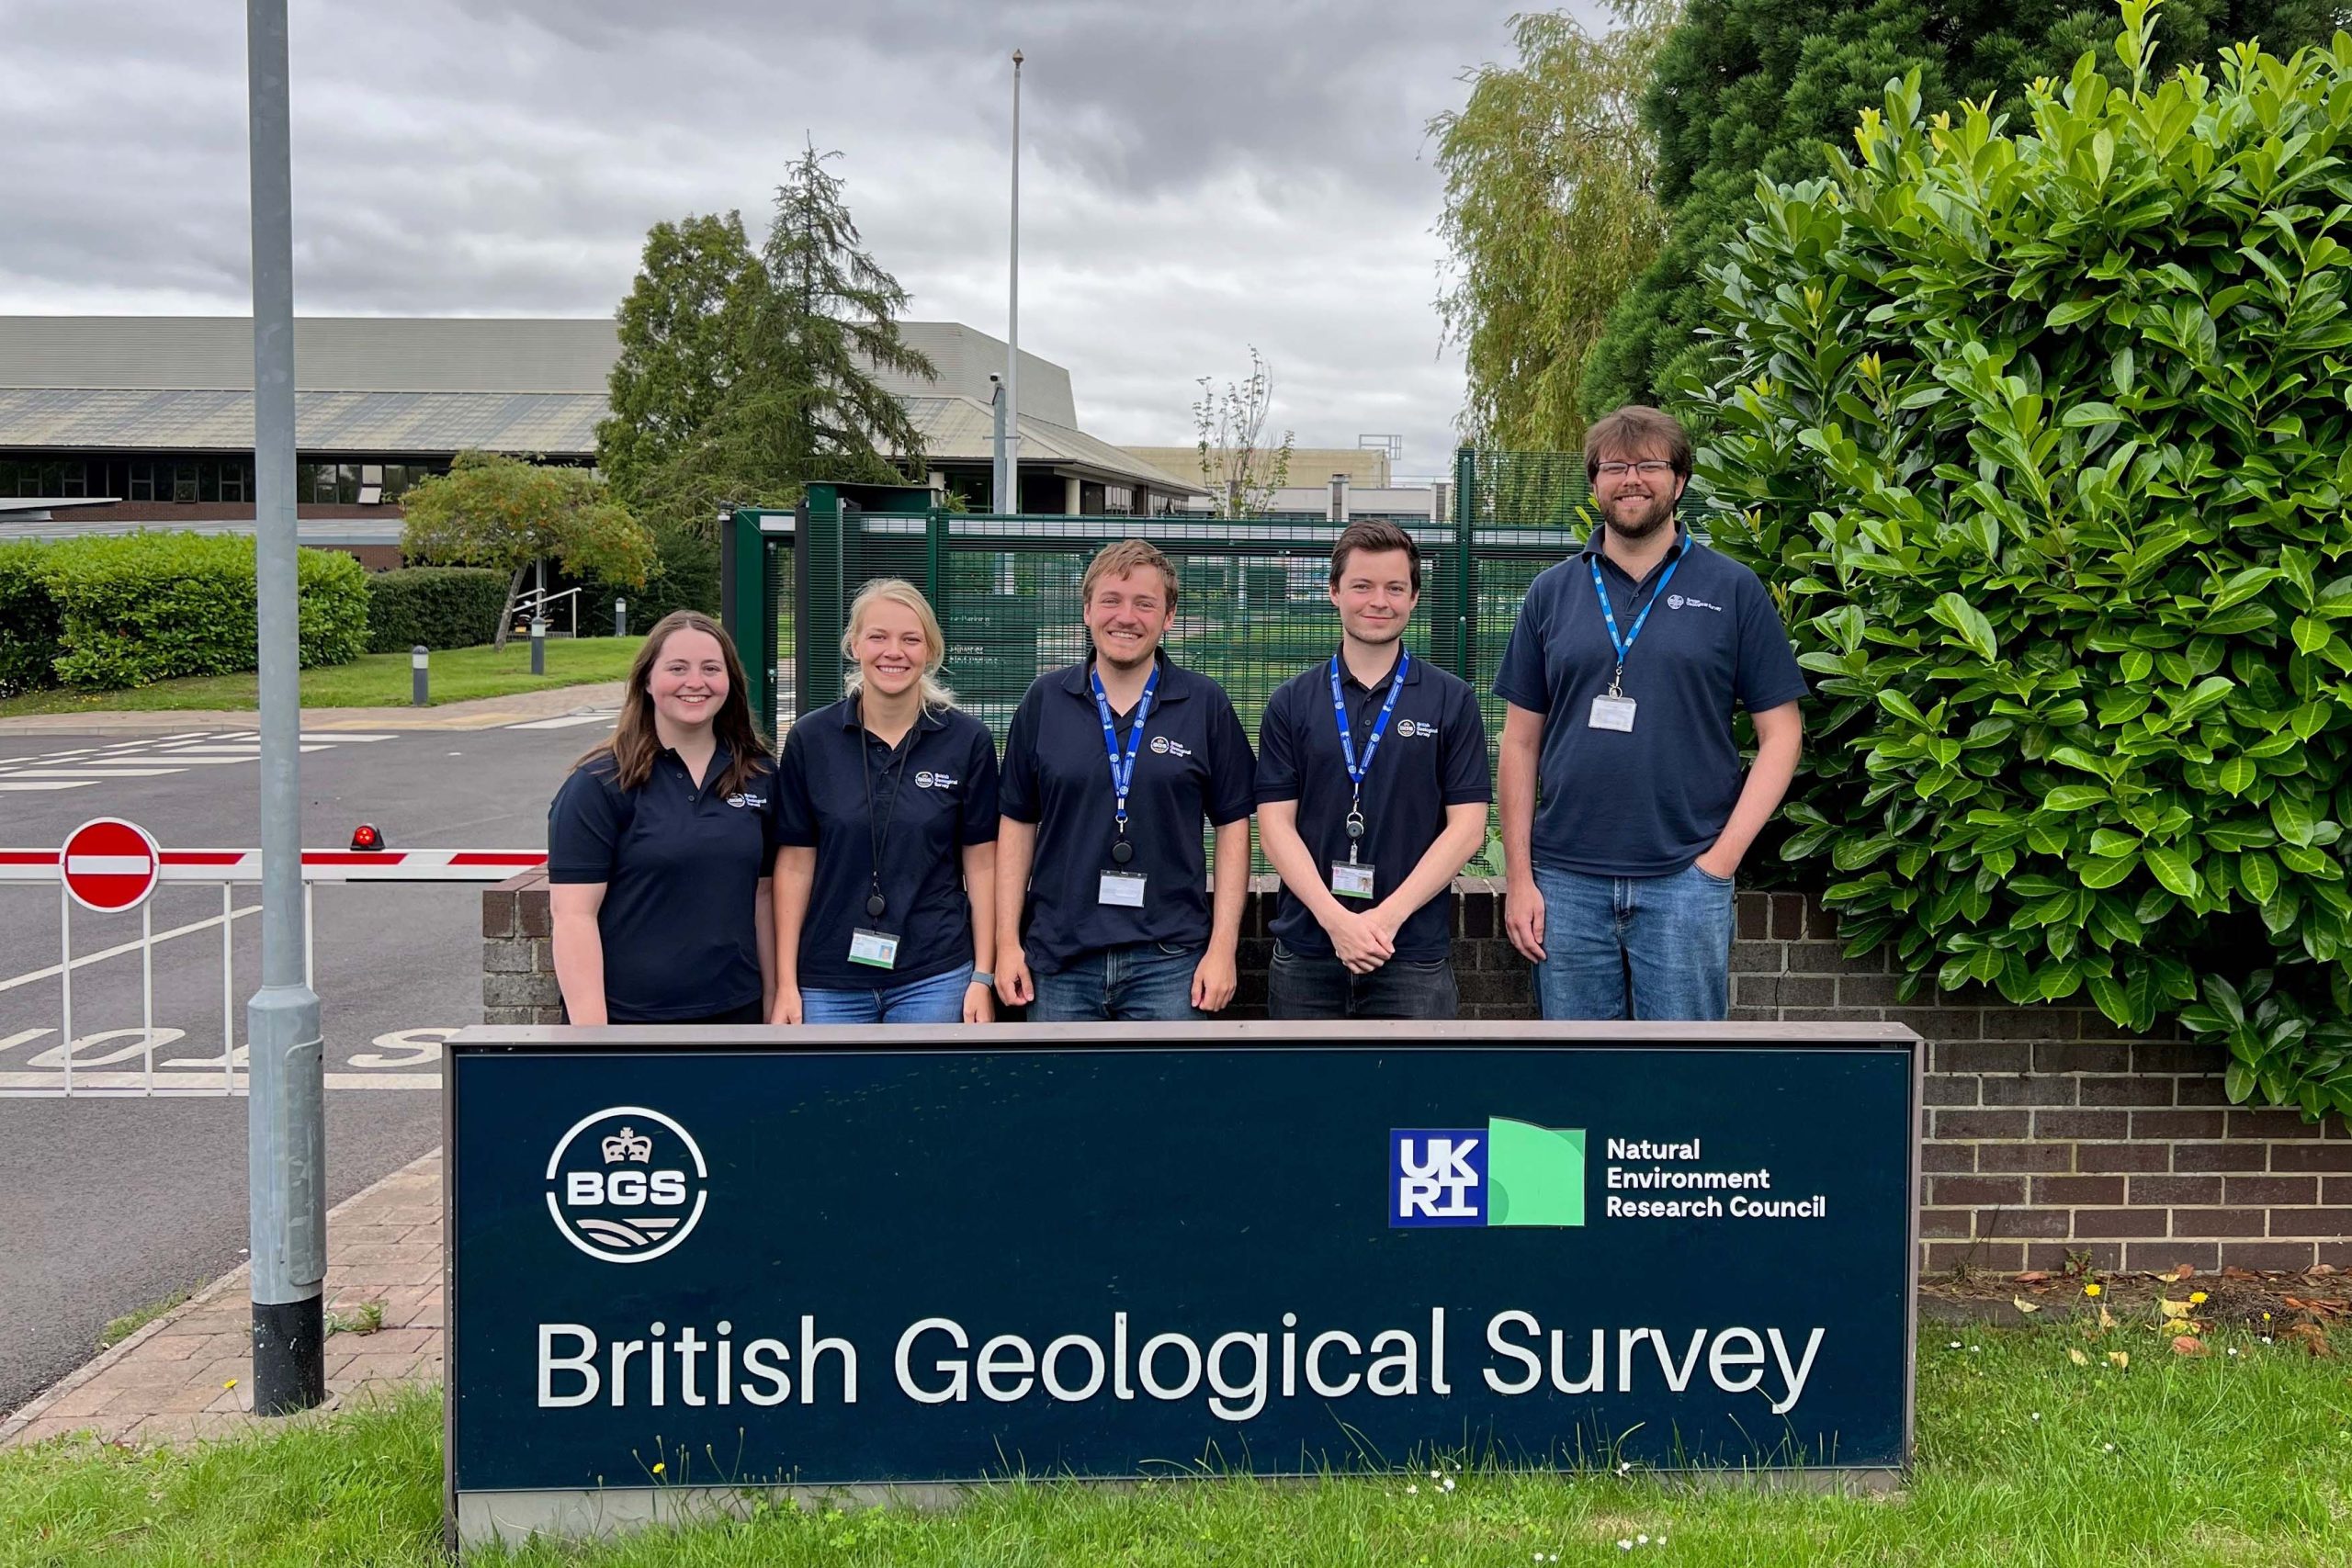 Lucy Little and Finn Cummins complete the 20th year of placements, whilst Sophia Dowell (2017 to 2018) and David King (2018 to 2019) are currently finishing their PhD projects at BGS. Former placement student Elliott Hamilton (2010 to 2011) now oversees industrial placements at BGS.